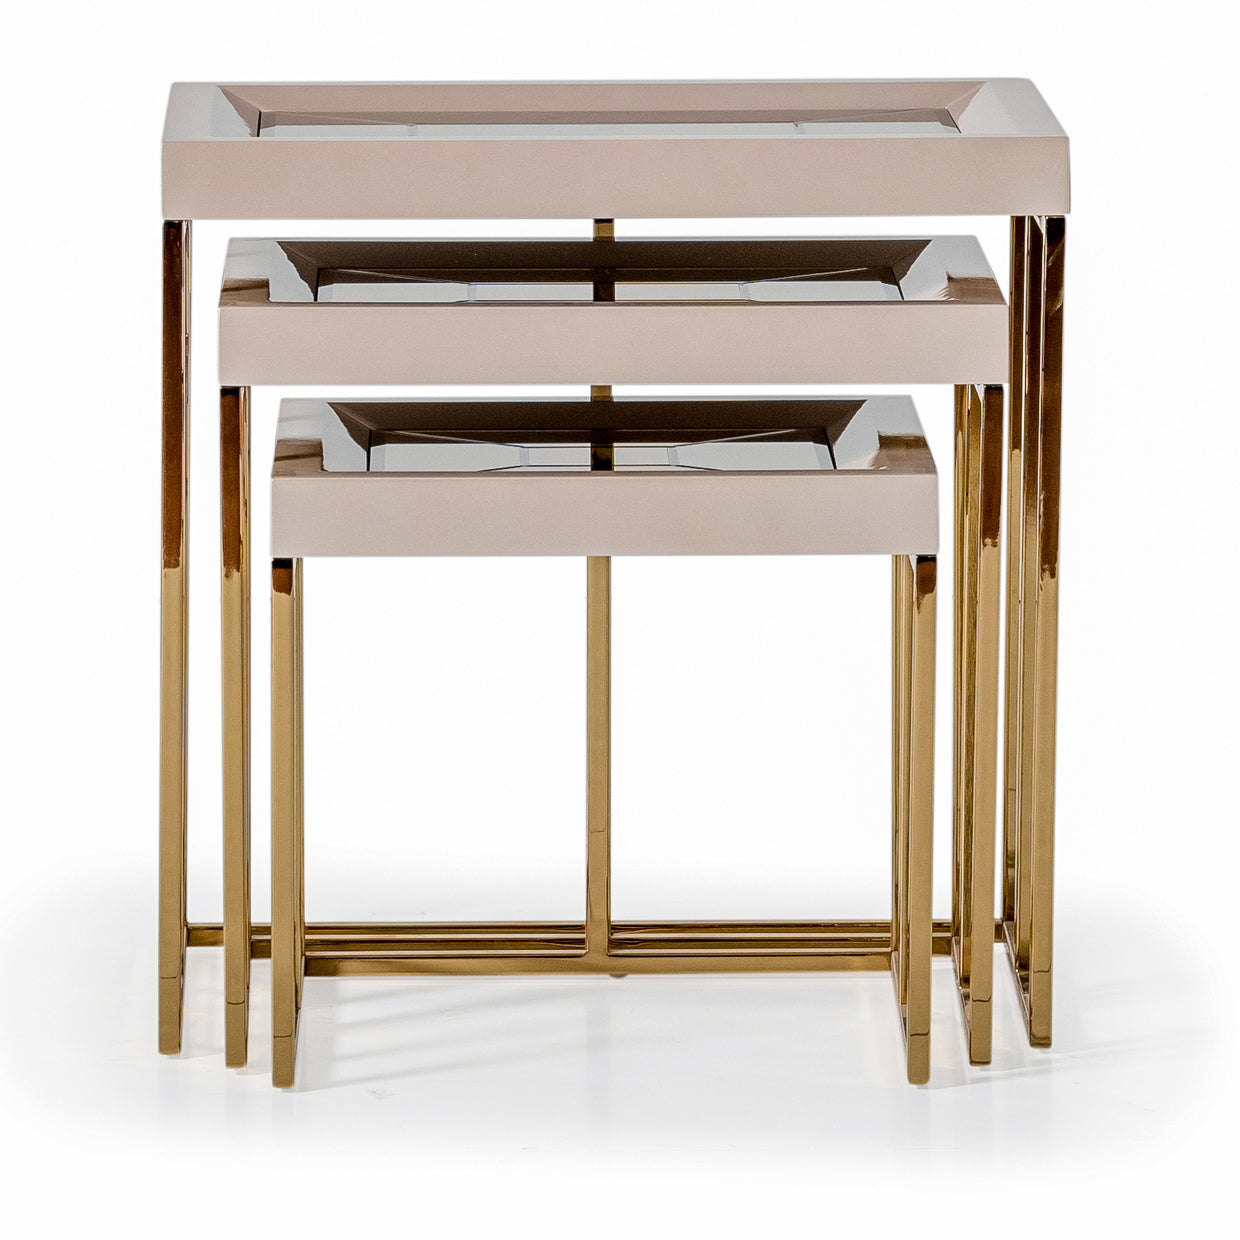 CARMELA, Nesting tables, Titanium gold finished leg, Shimmering ivory table tops, Mirror inlays, Opulence, Glamour, Attention to detail, Decorative pieces, Versatile, Stunning design, Exceptional functionality, Luxury living space, michael amini